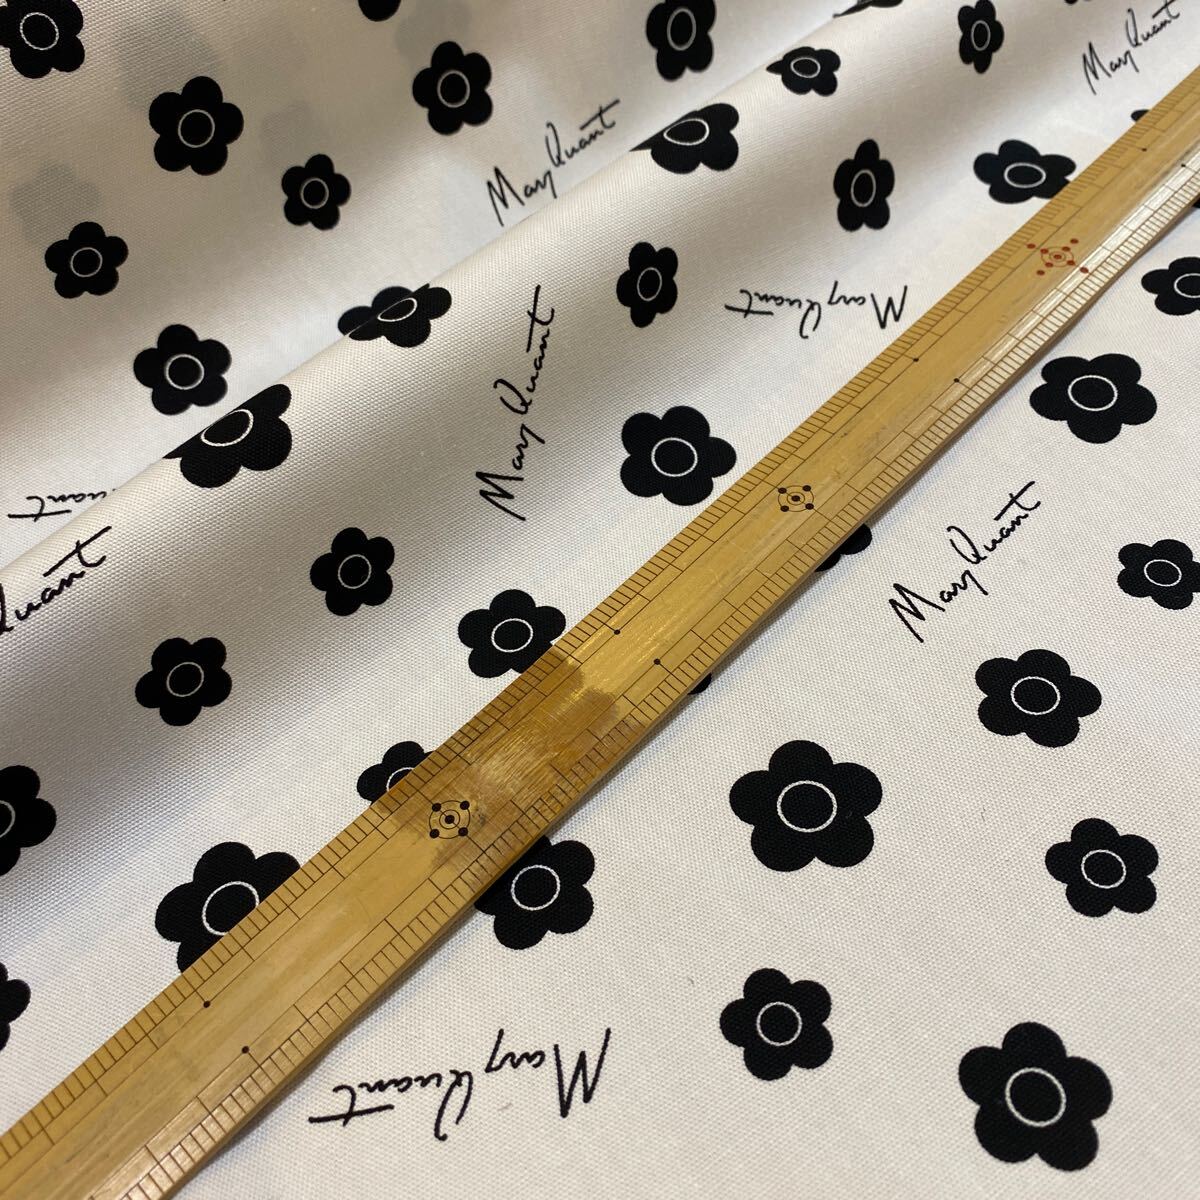 2m Mary Quant MARYQUANT daisy brand cloth is gire cloth 